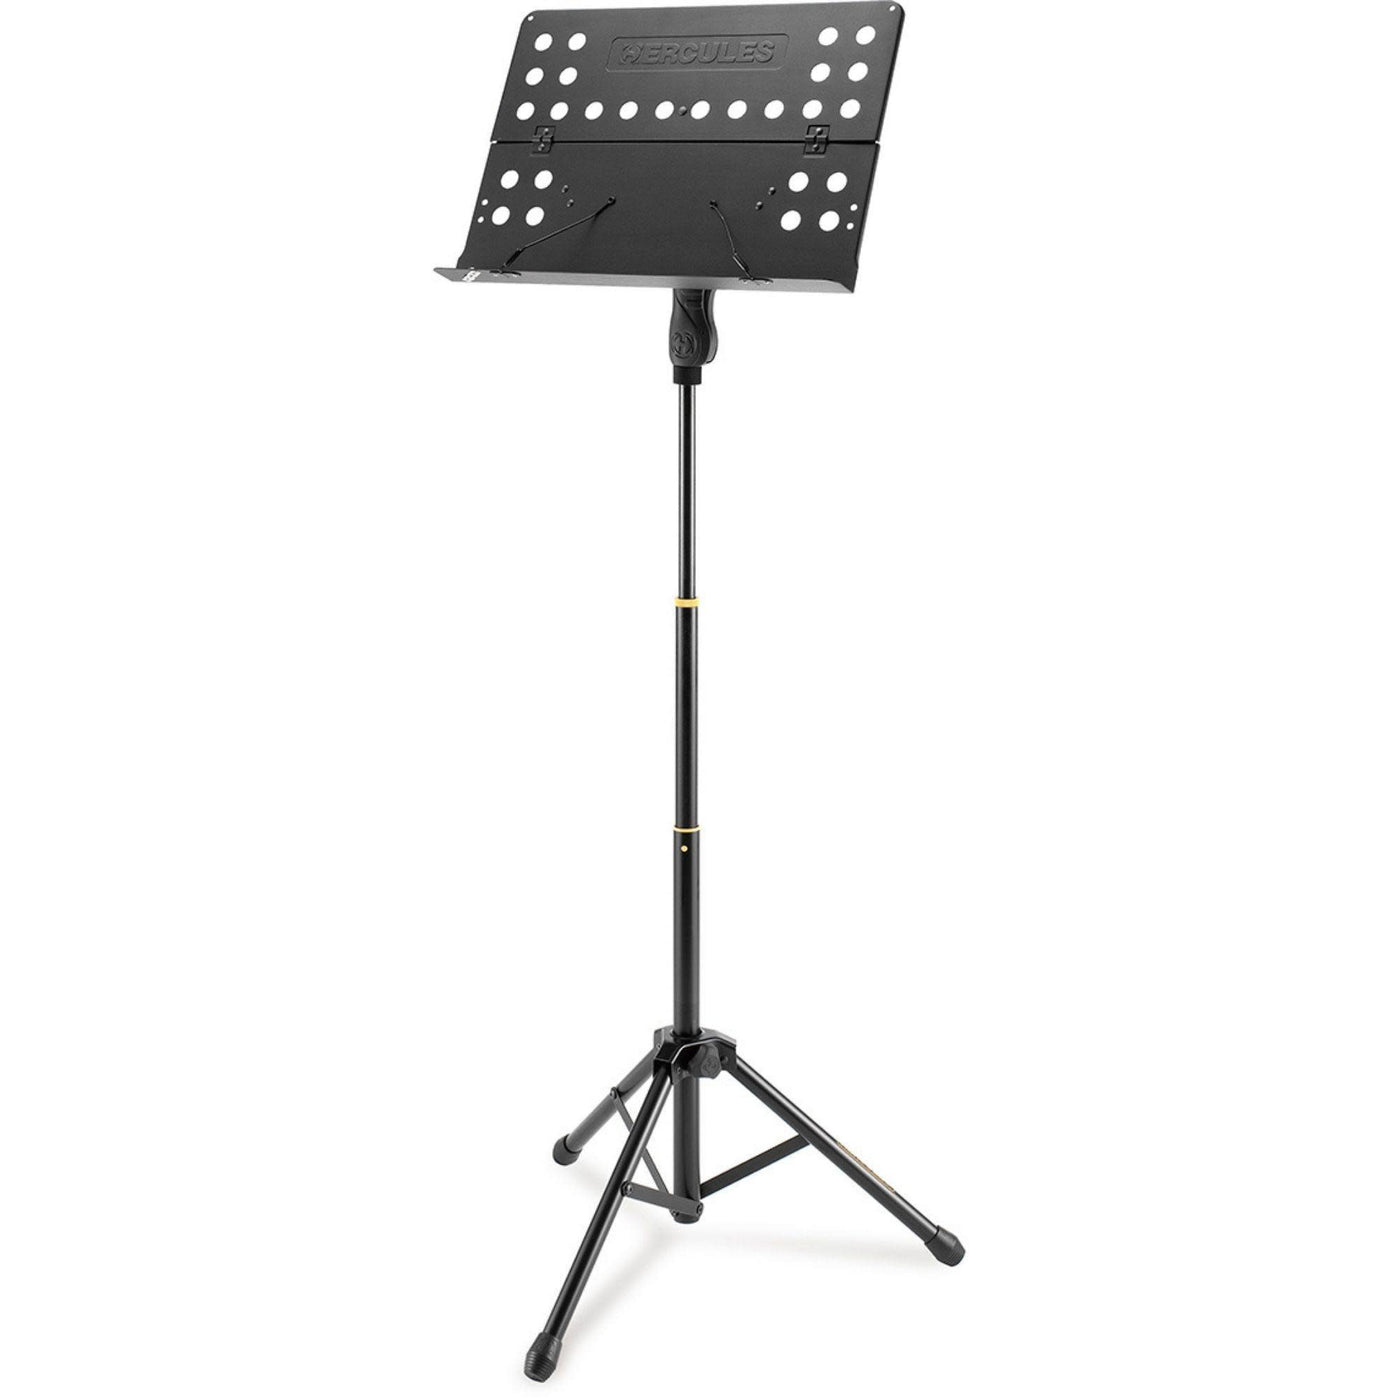 Hercules BS418B Orchestra Stand with Perforated Desk and Tripod Legs